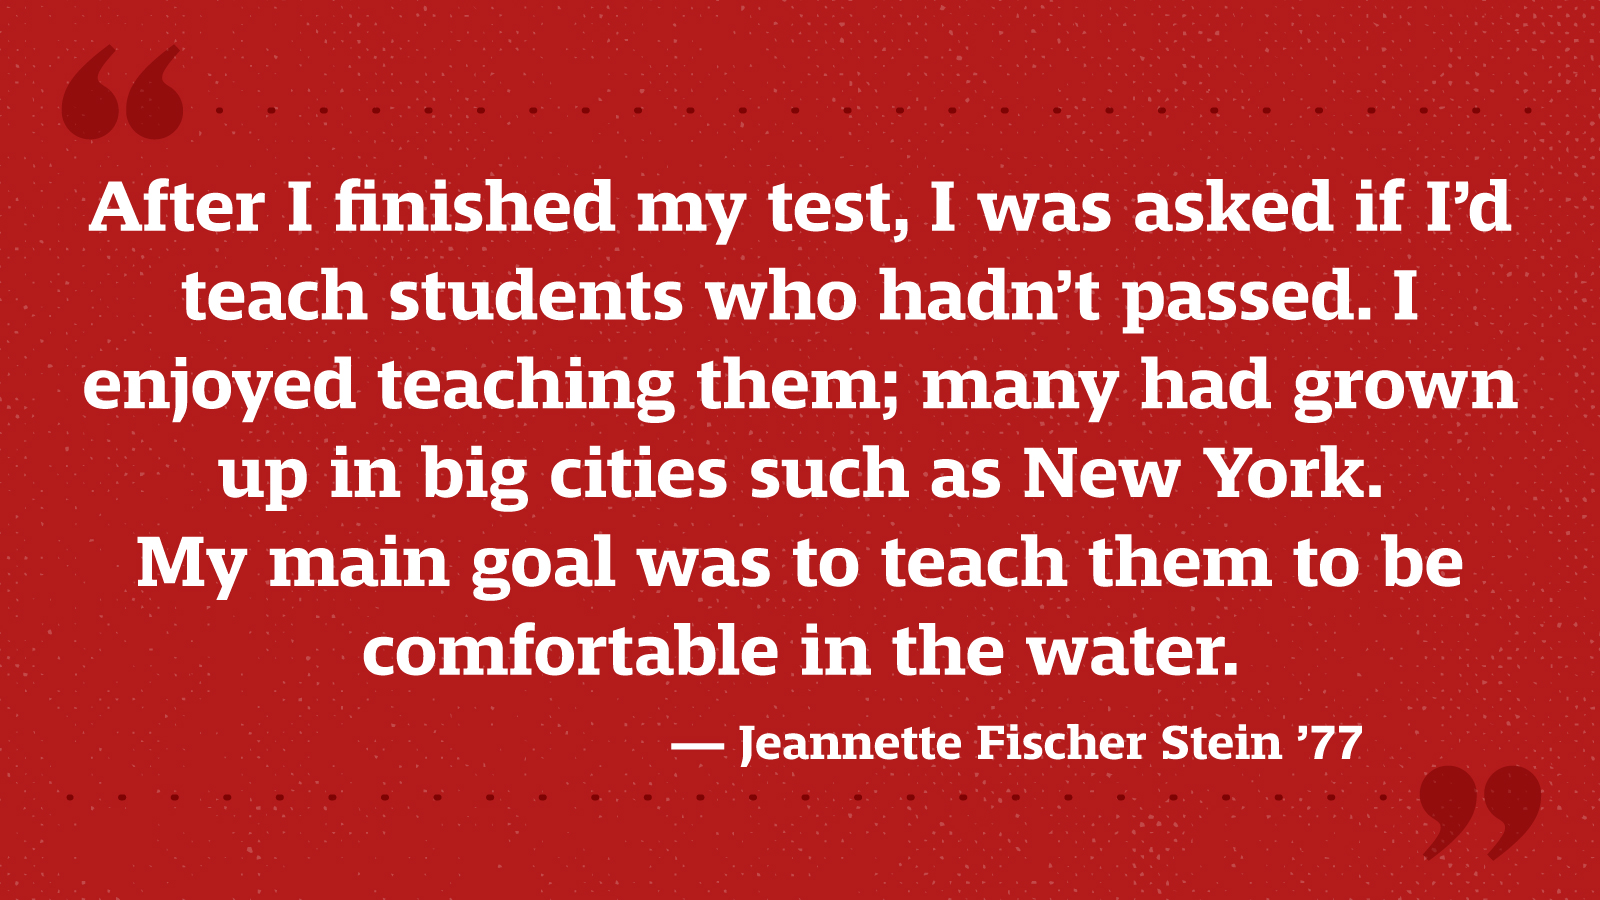 After I finished my test, I was asked if I’d teach students who hadn’t passed. I enjoyed teaching them; many had grown up in big cities such as New York. My main goal was to teach them to be comfortable in the water. — Jeannette Fischer Stein ’77